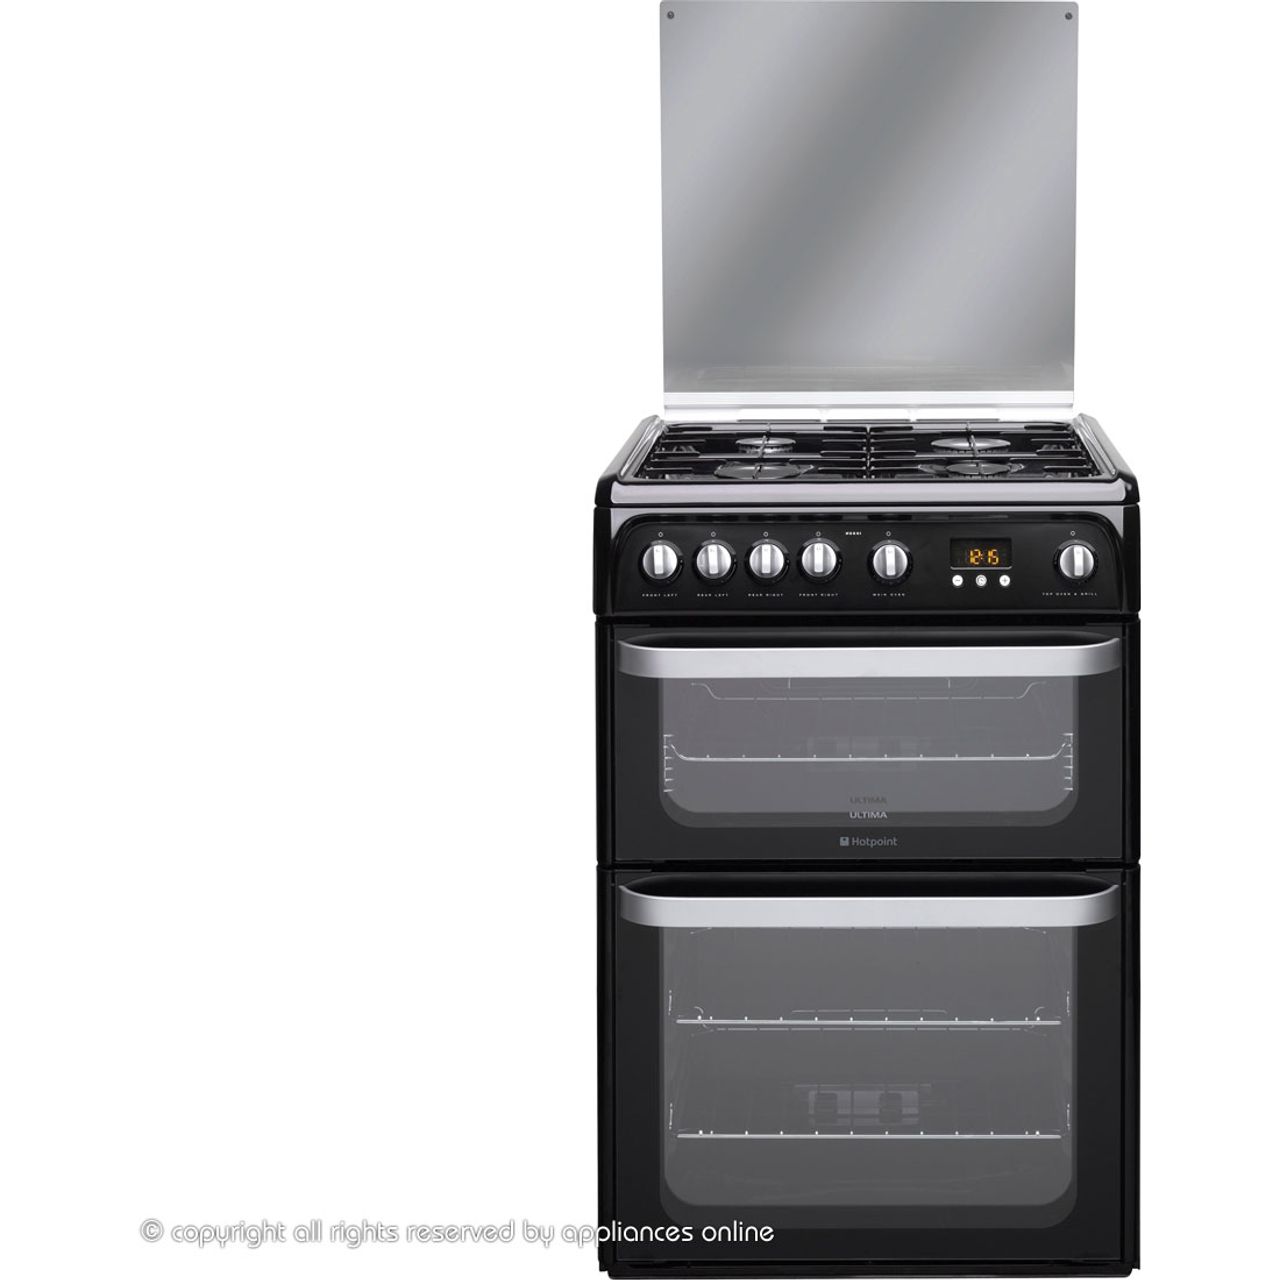 Hotpoint Ultima HUG61K 60cm Gas Cooker with Variable Gas Grill Review